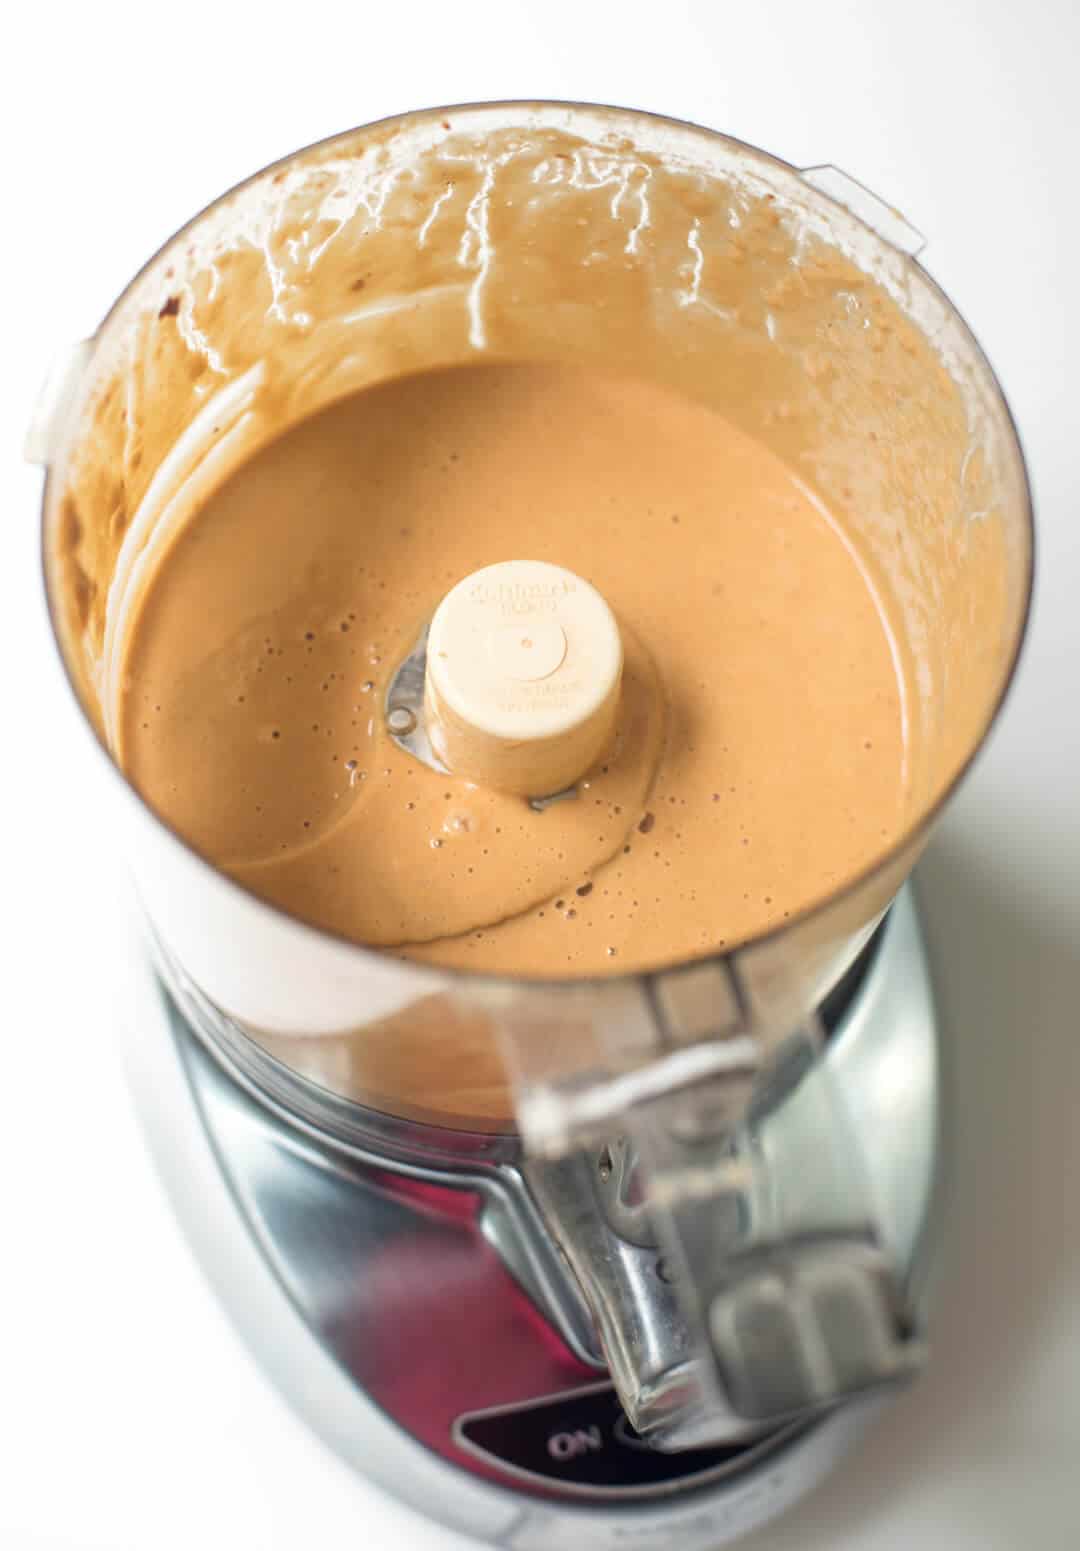 Peanut sauce after being blended in a food processor.